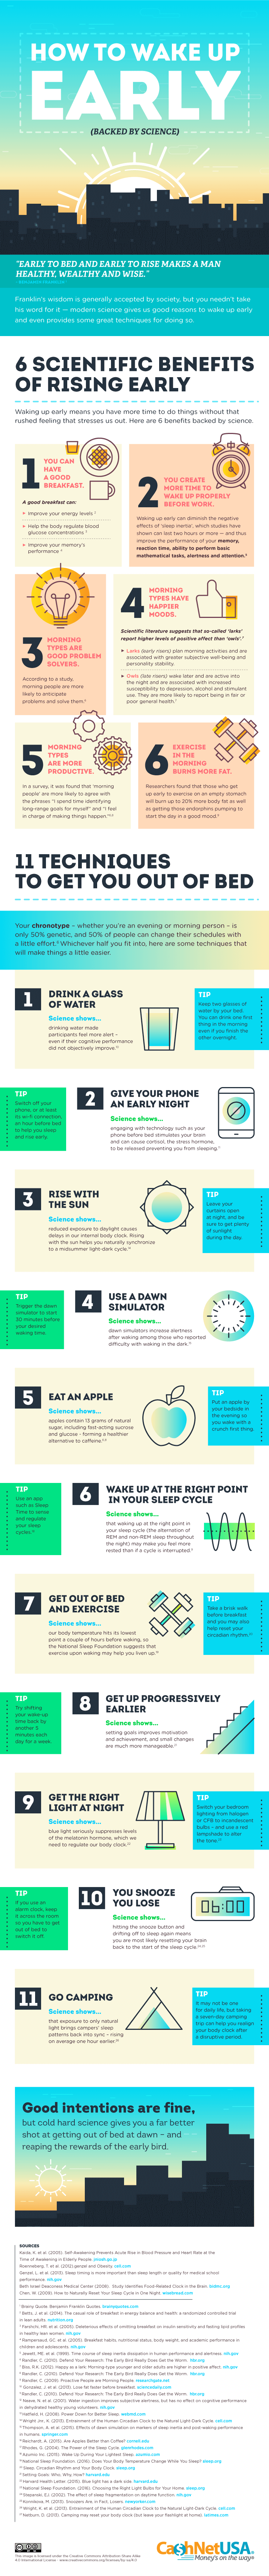 wake up early infographic